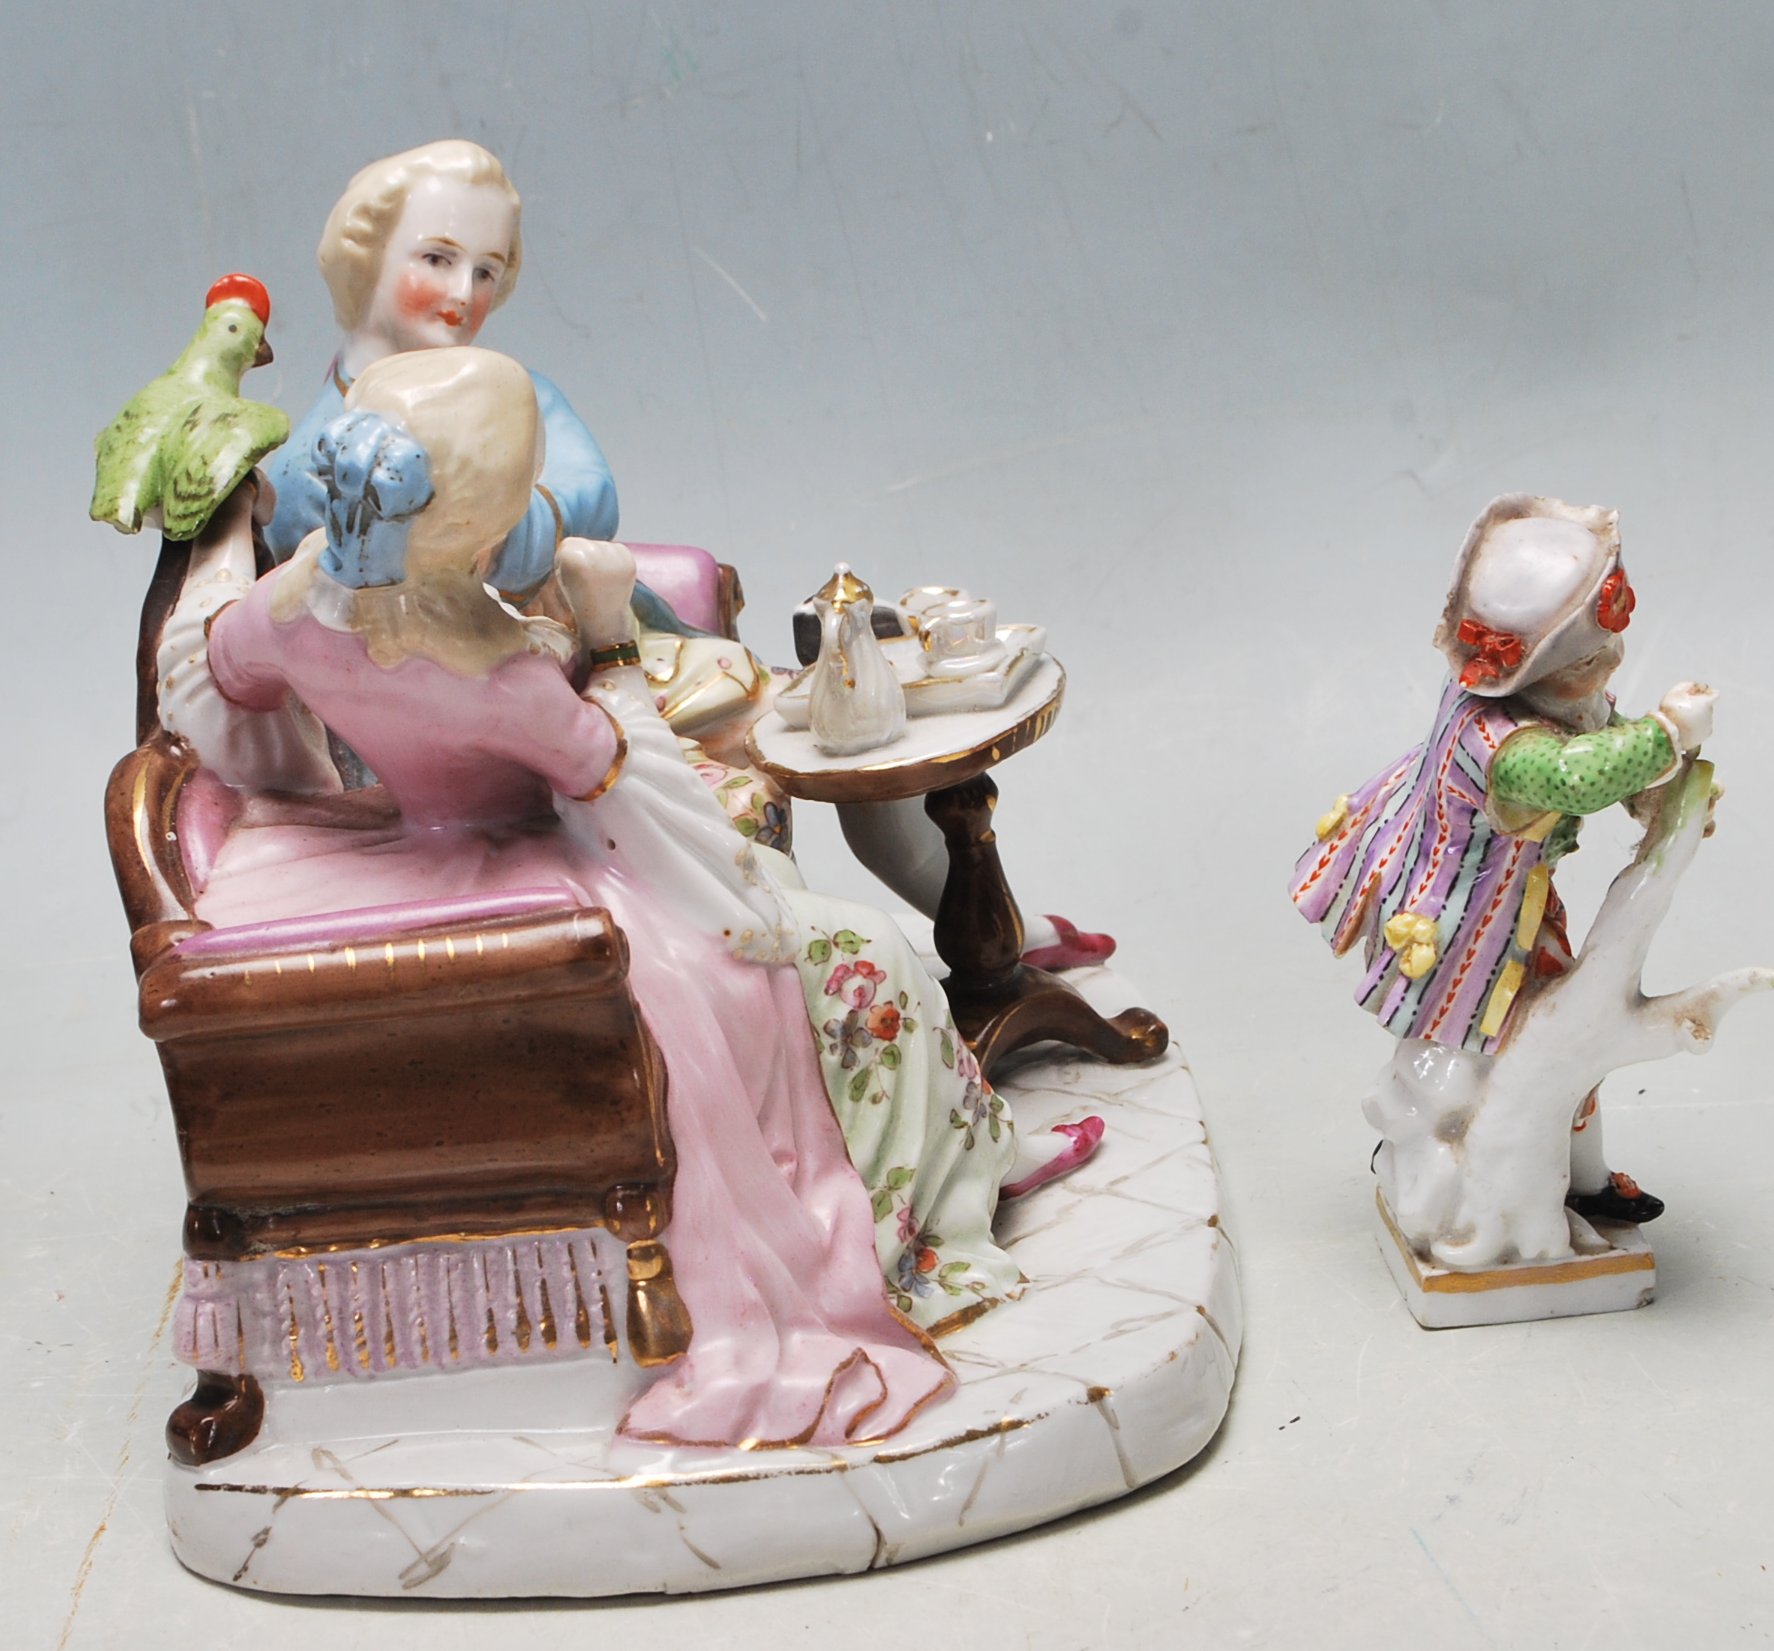 ANTIQUE 19TH CENTURY MEISSEN PORCELAIN FIGURINE TOGETHER WITH A GERMAN FIGURINE OF A COURTING COUPLE - Image 2 of 6